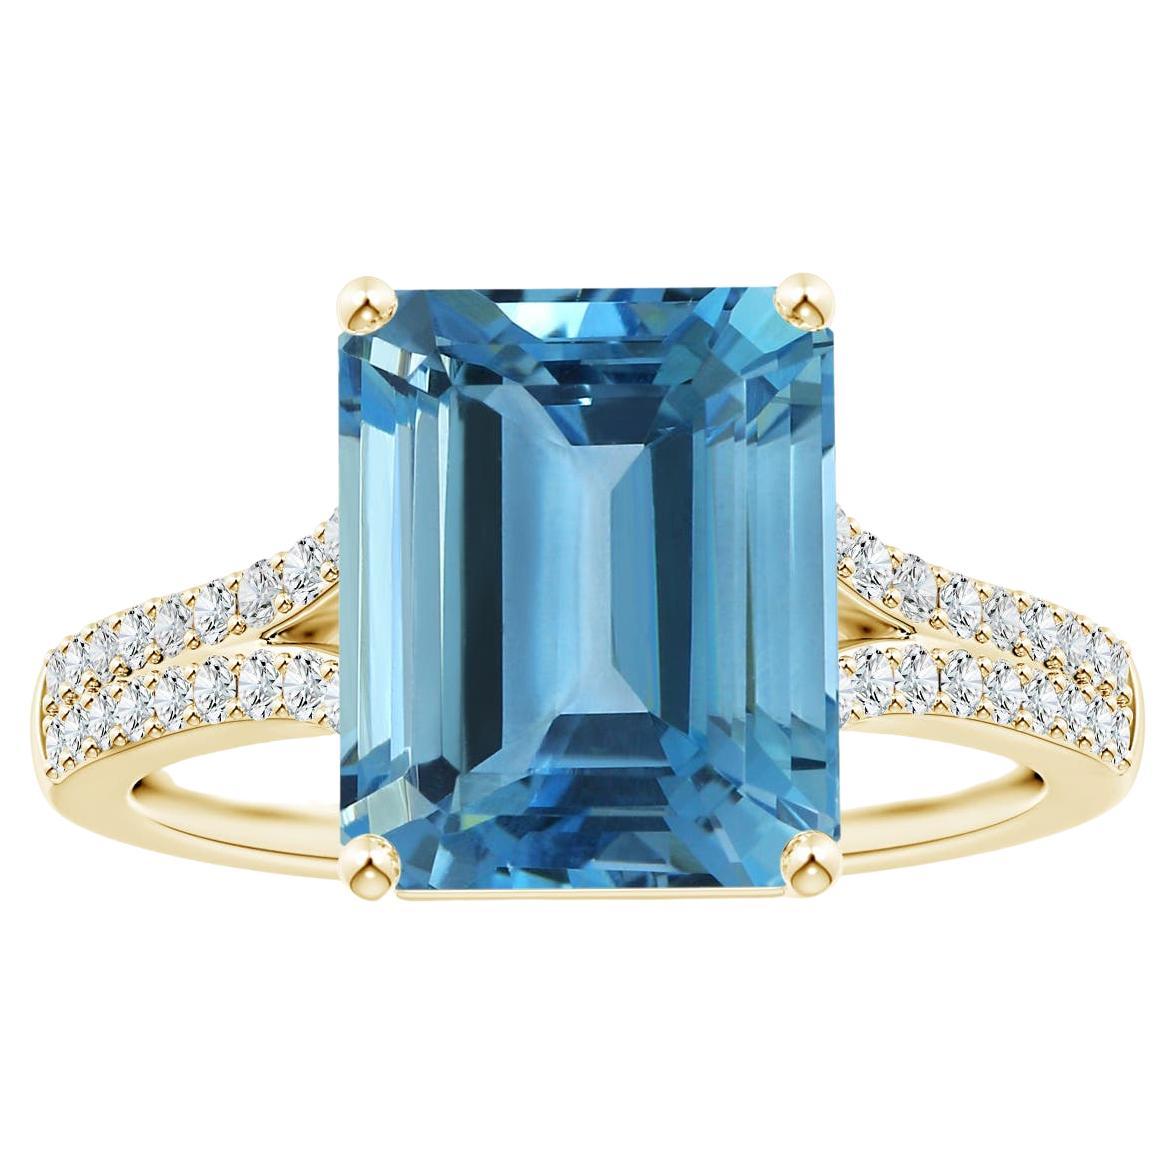 For Sale:  ANGARA GIA Certified 5.04ct Aquamarine Ring in 18K Yellow Gold with Diamond